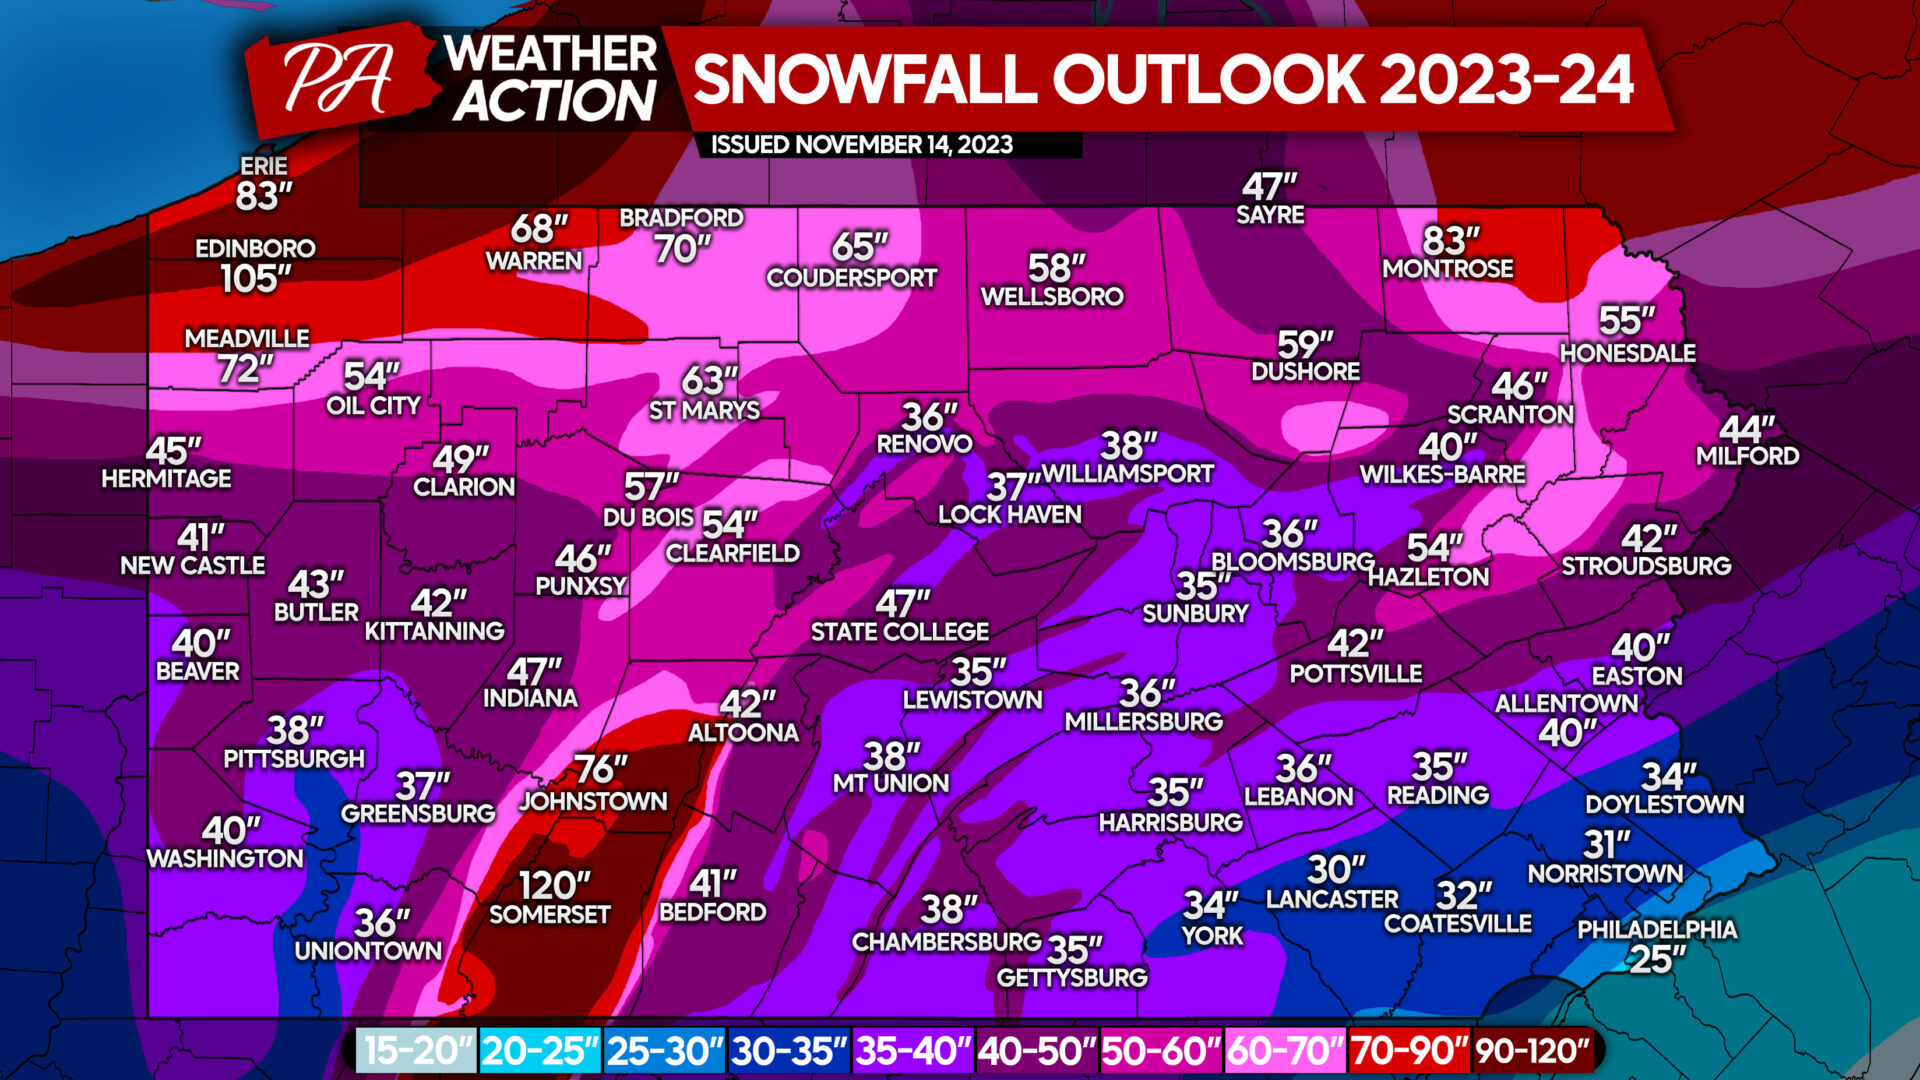 2023 2024 Winter Outlook for Pennsylvania Hope for Snow Lovers in